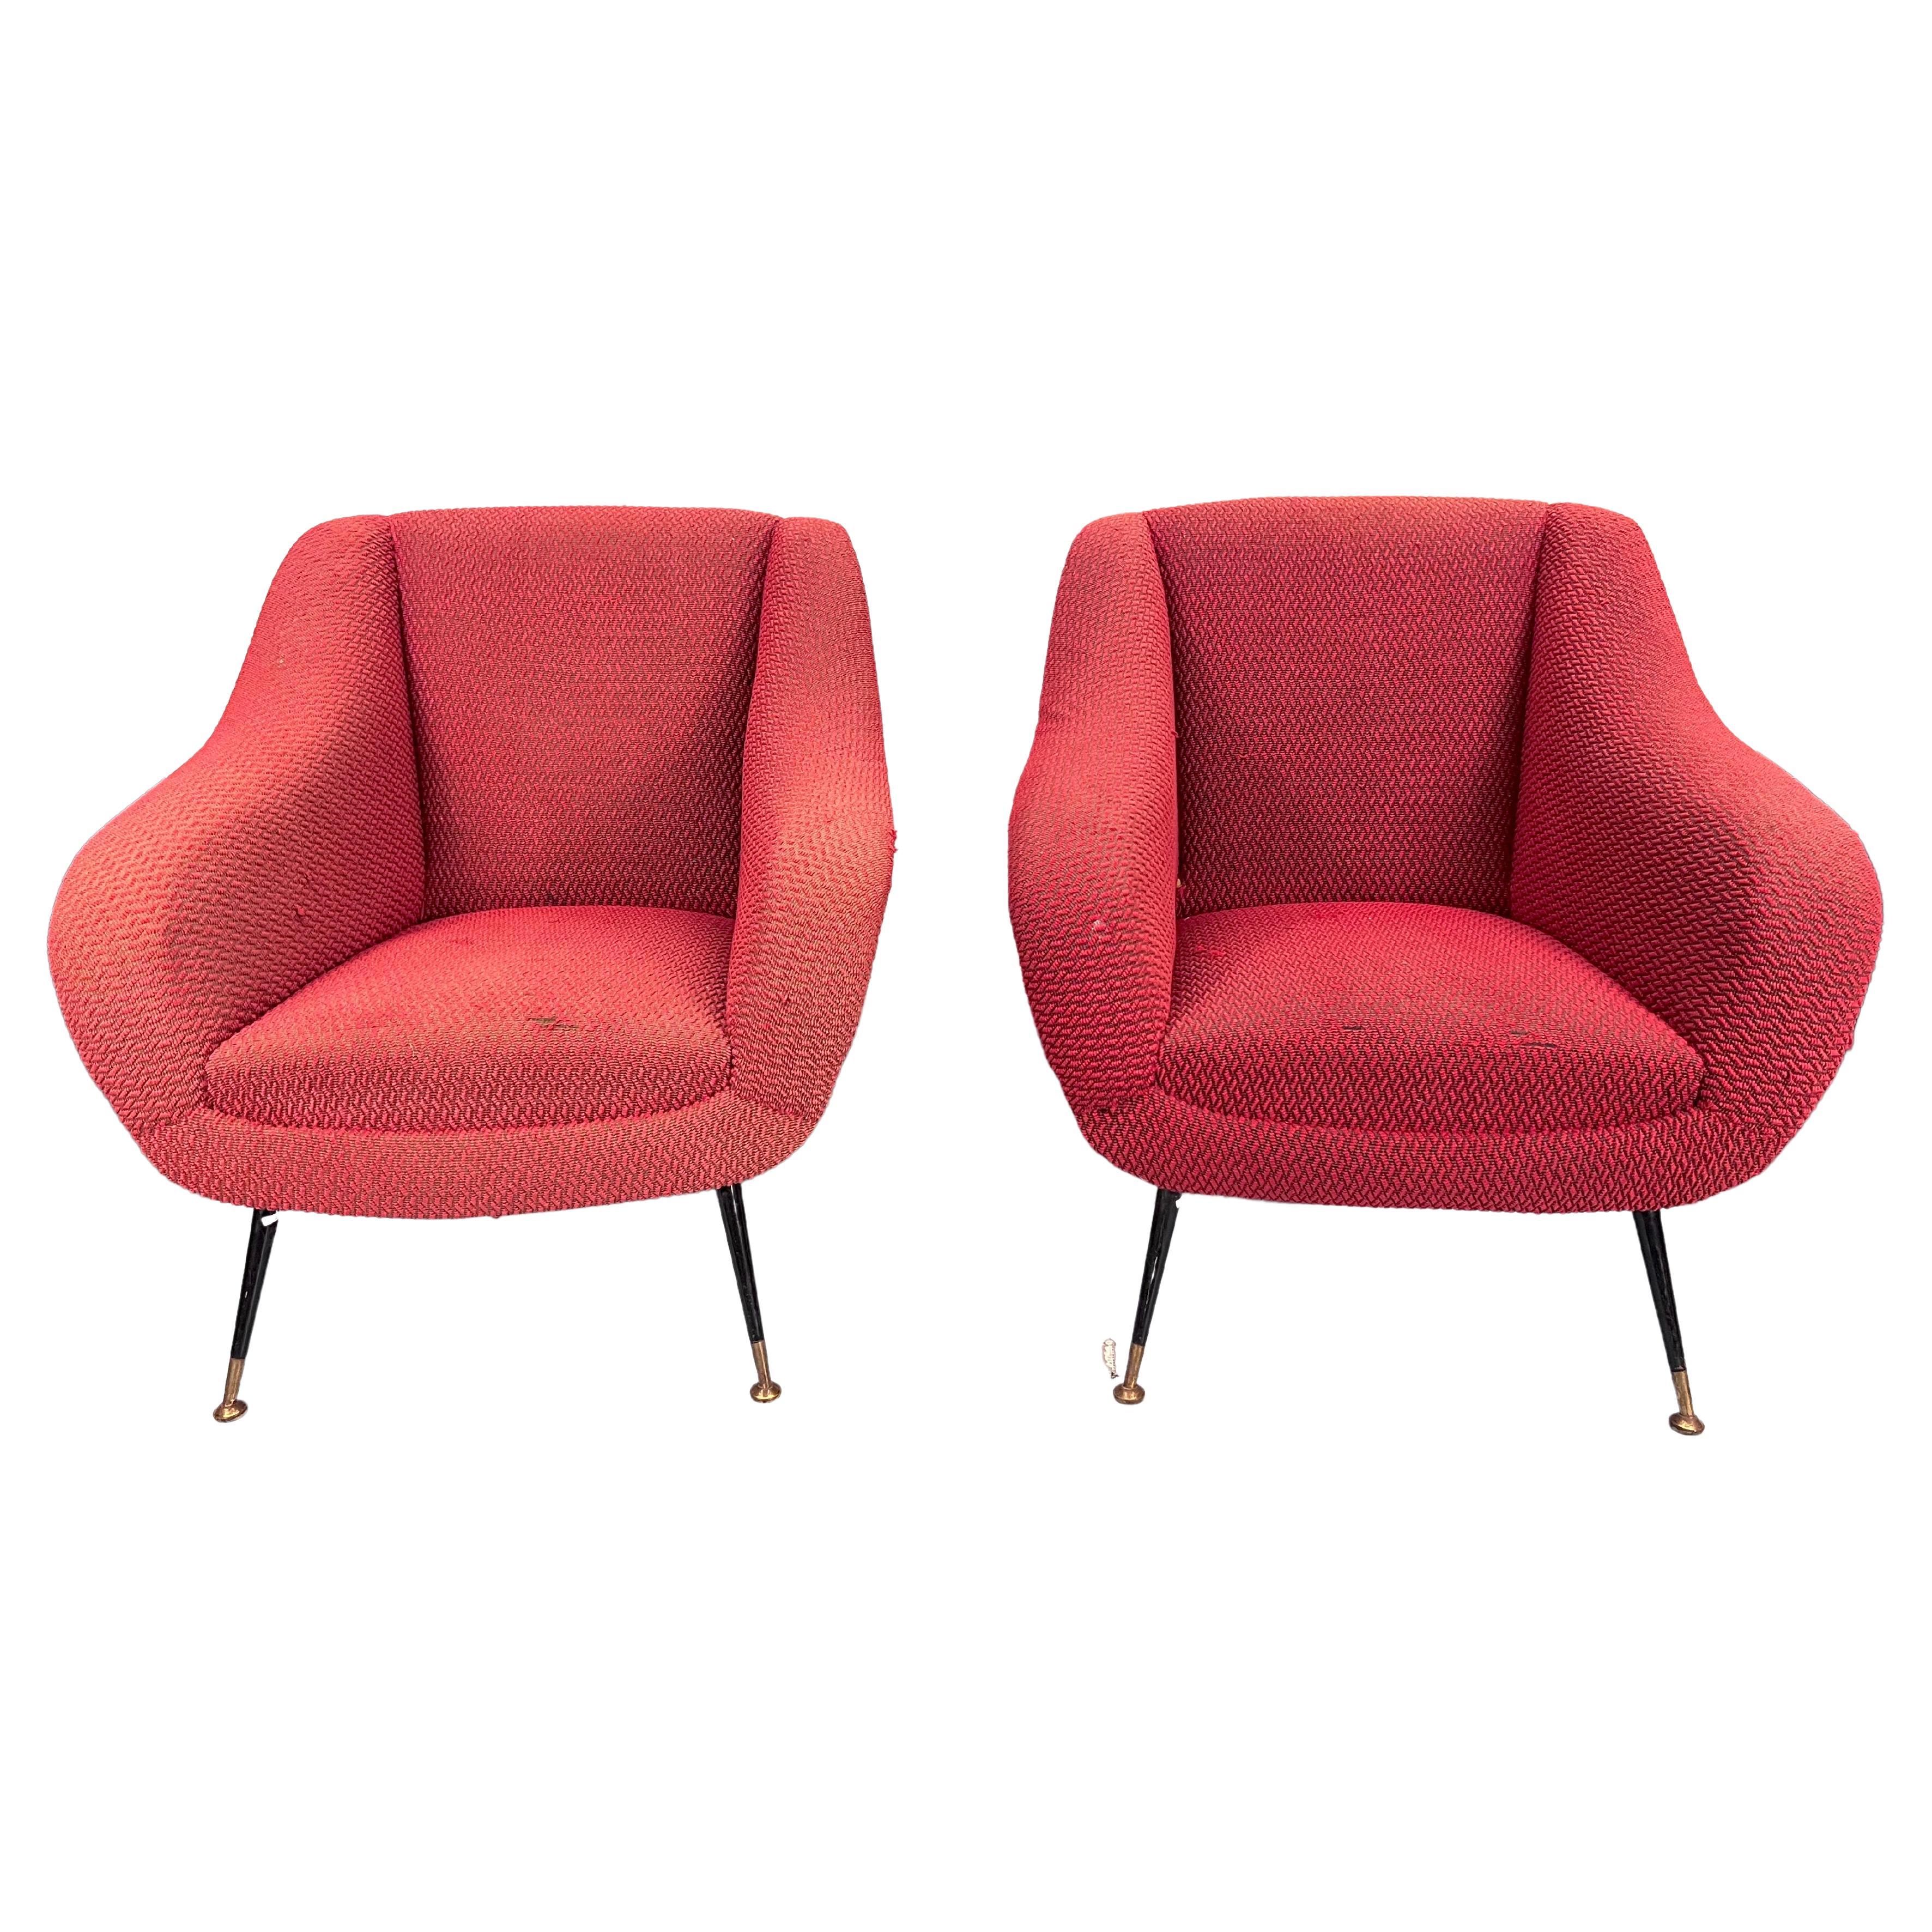 Mid-Century Pair of Lounge Chairs by Gigi Radice for Minotti, Italy, 1950s For Sale